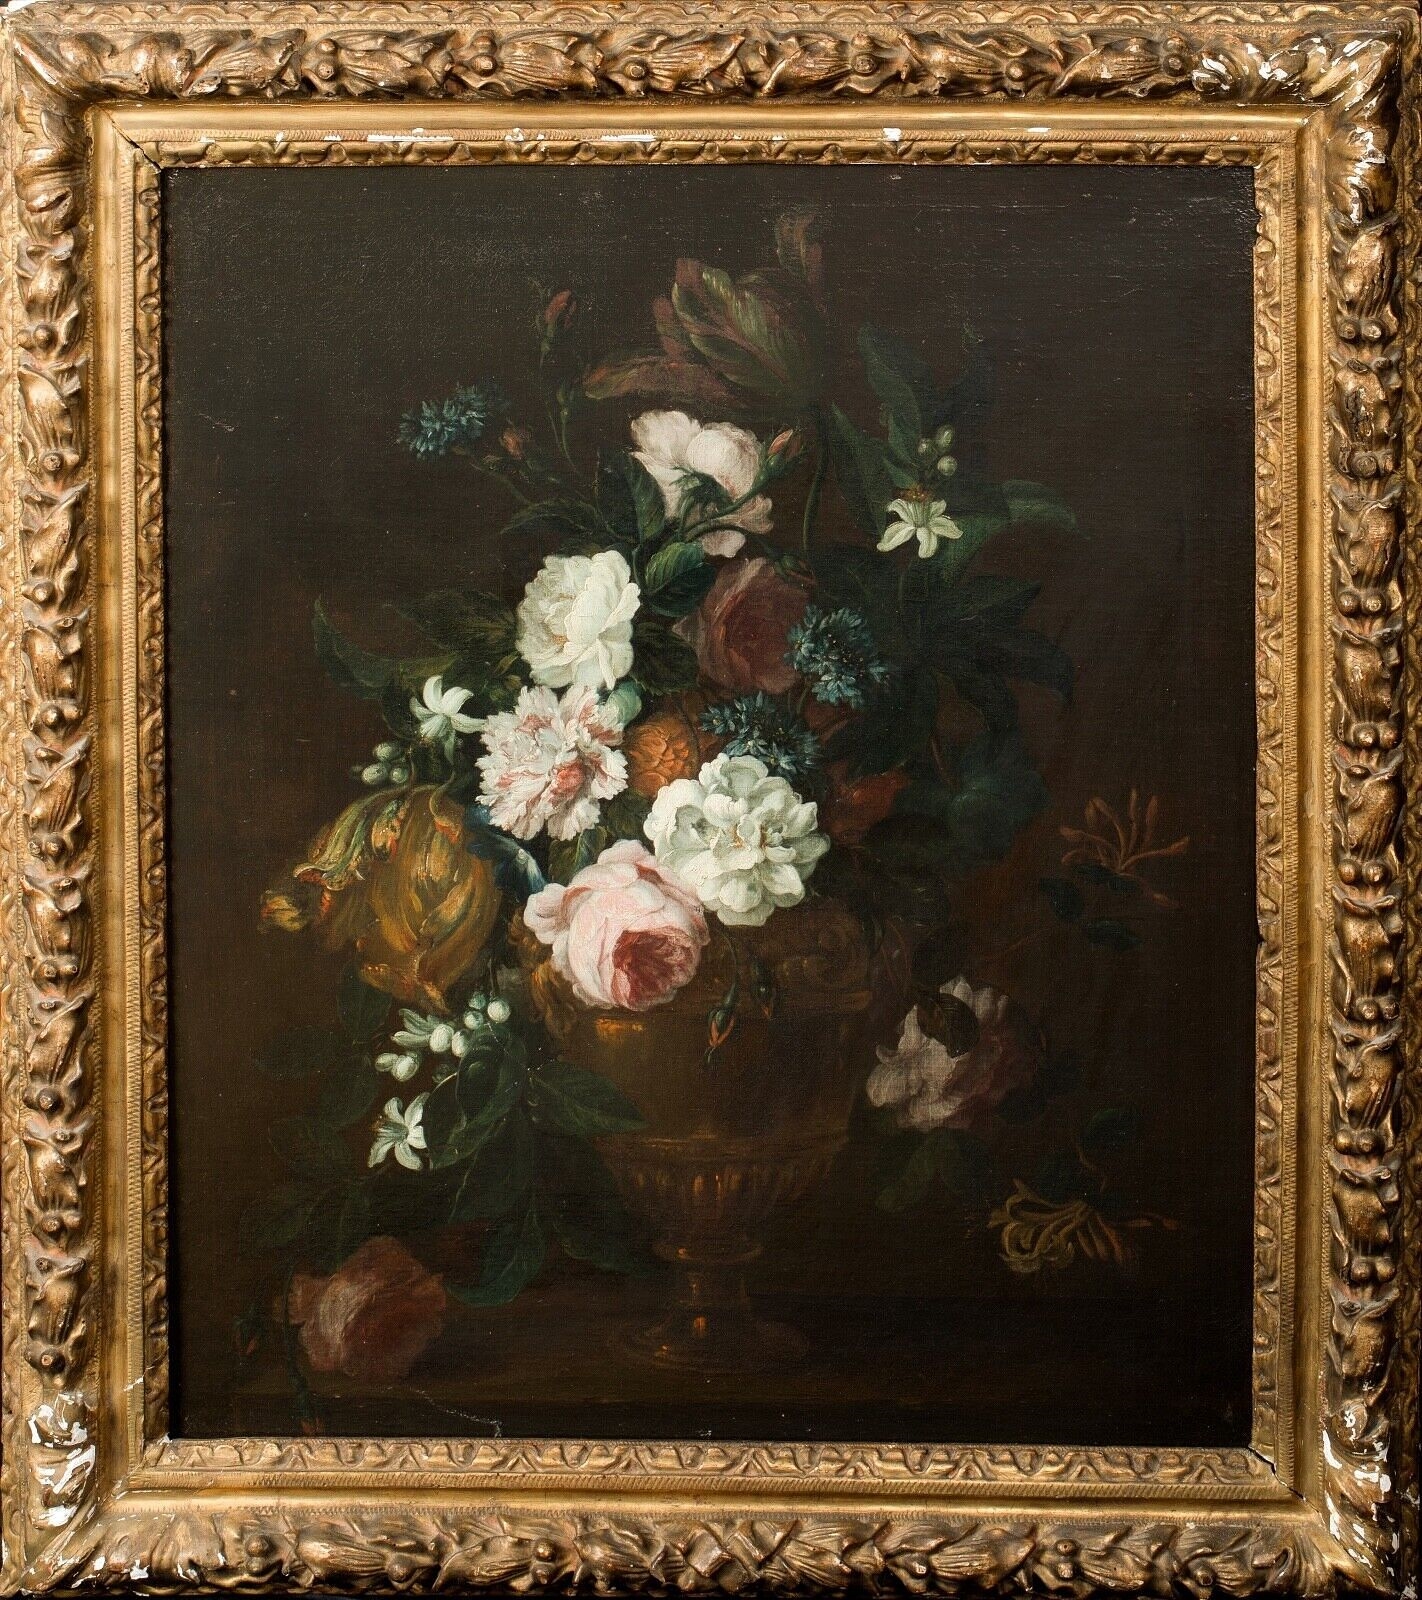 STILL LIFE OF FLOWERS IN AN URN